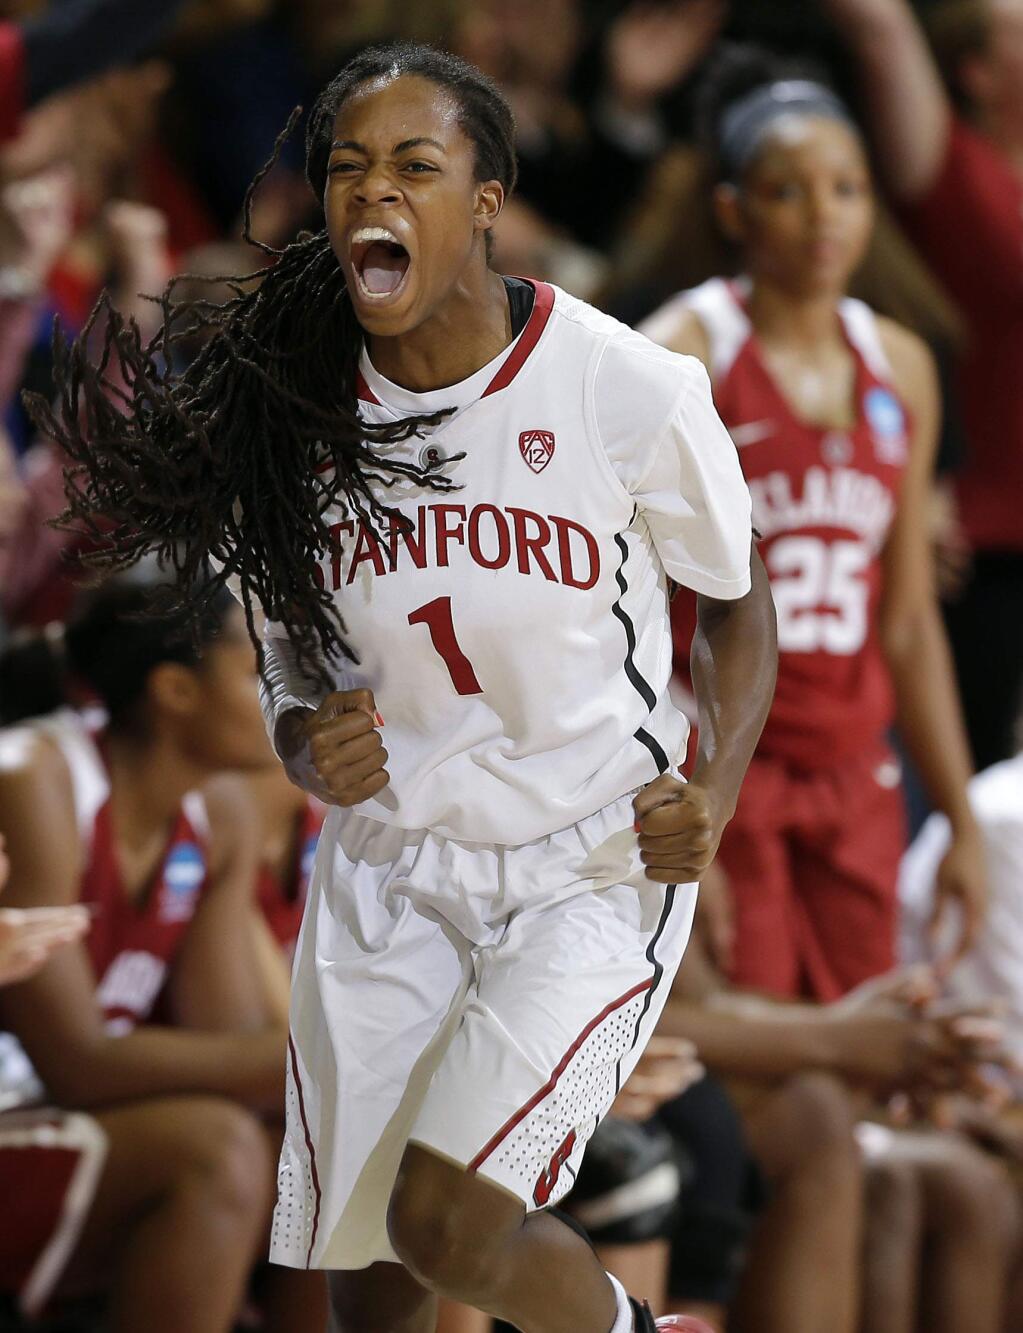 Stanford guard Lili Thompson (1) celebrates after scoring against Oklahoma during the first half of a women's college basketball game in the second round of the NCAA tournament Monday, March 23, 2015, in Stanford, Calif. (AP Photo/Marcio Jose Sanchez)